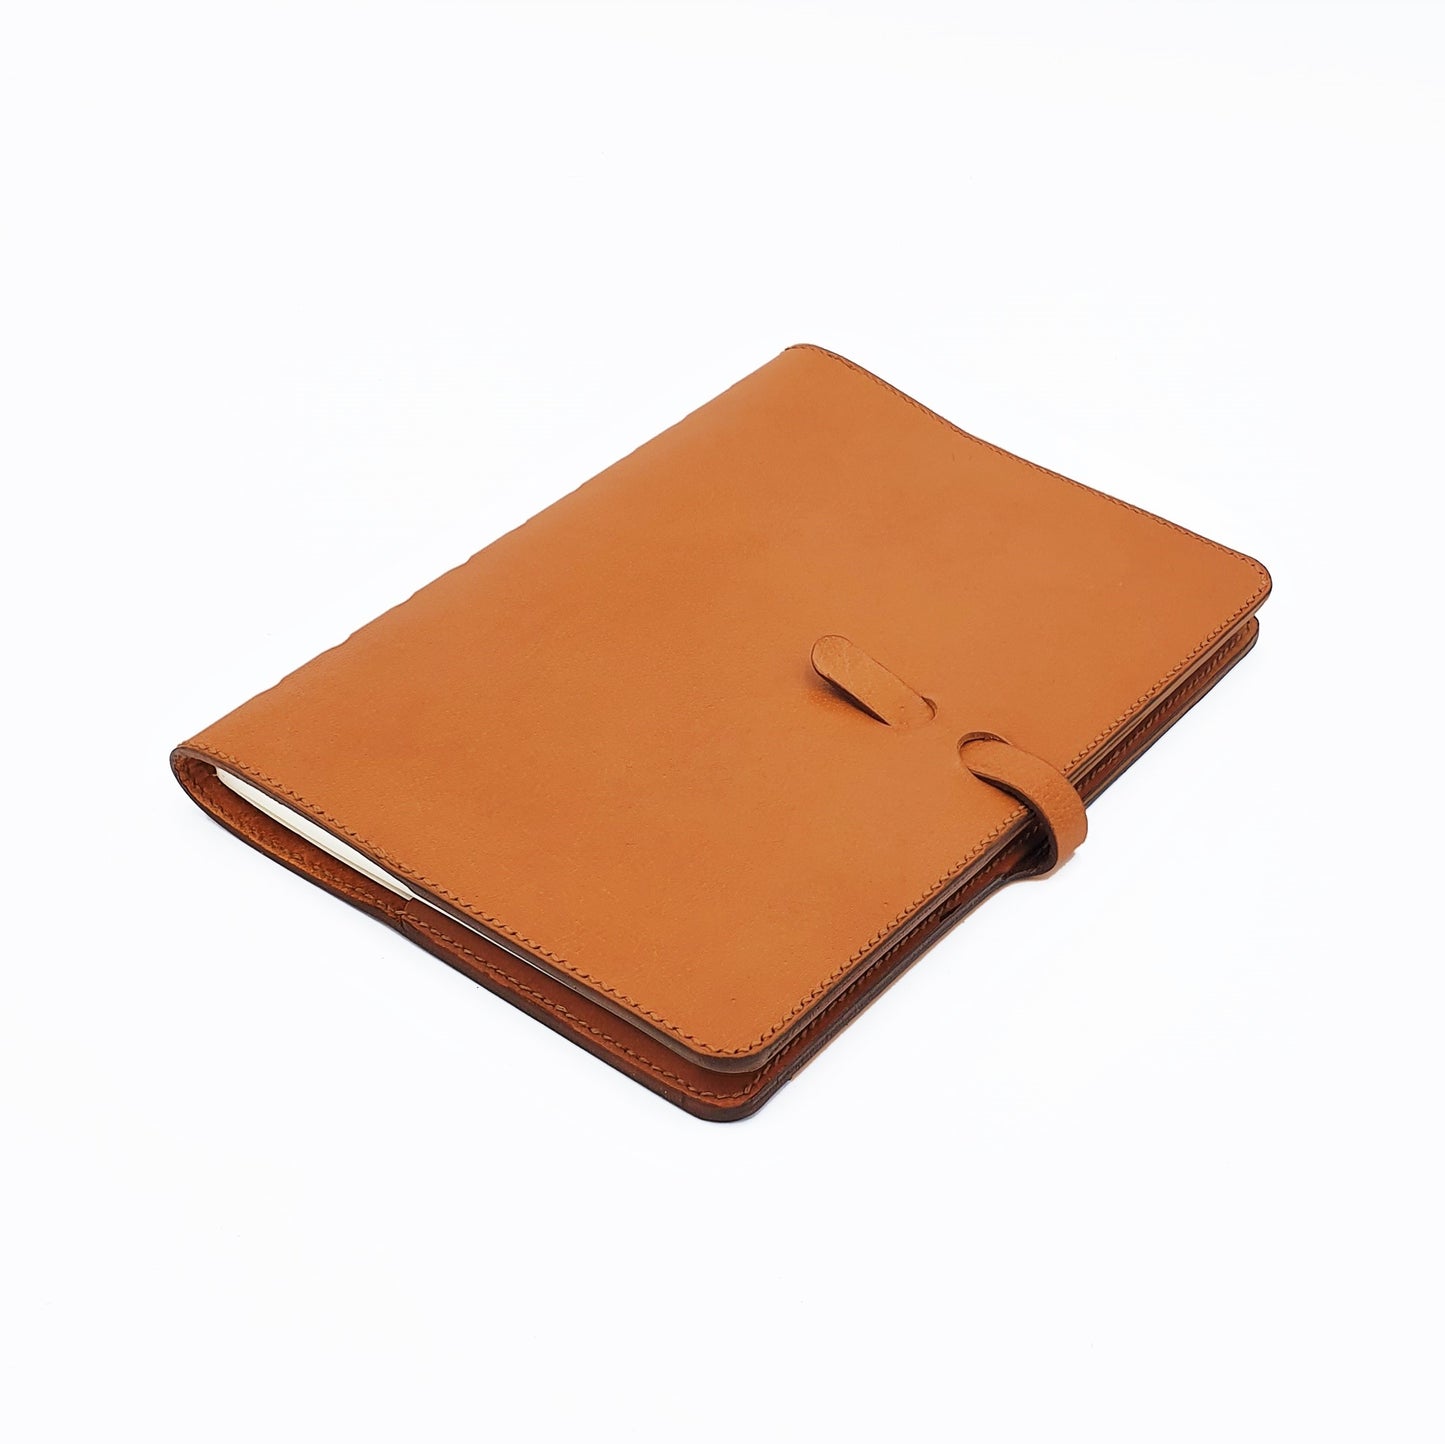 PICCOLO B5-P Traveller's Notebook Sleeve